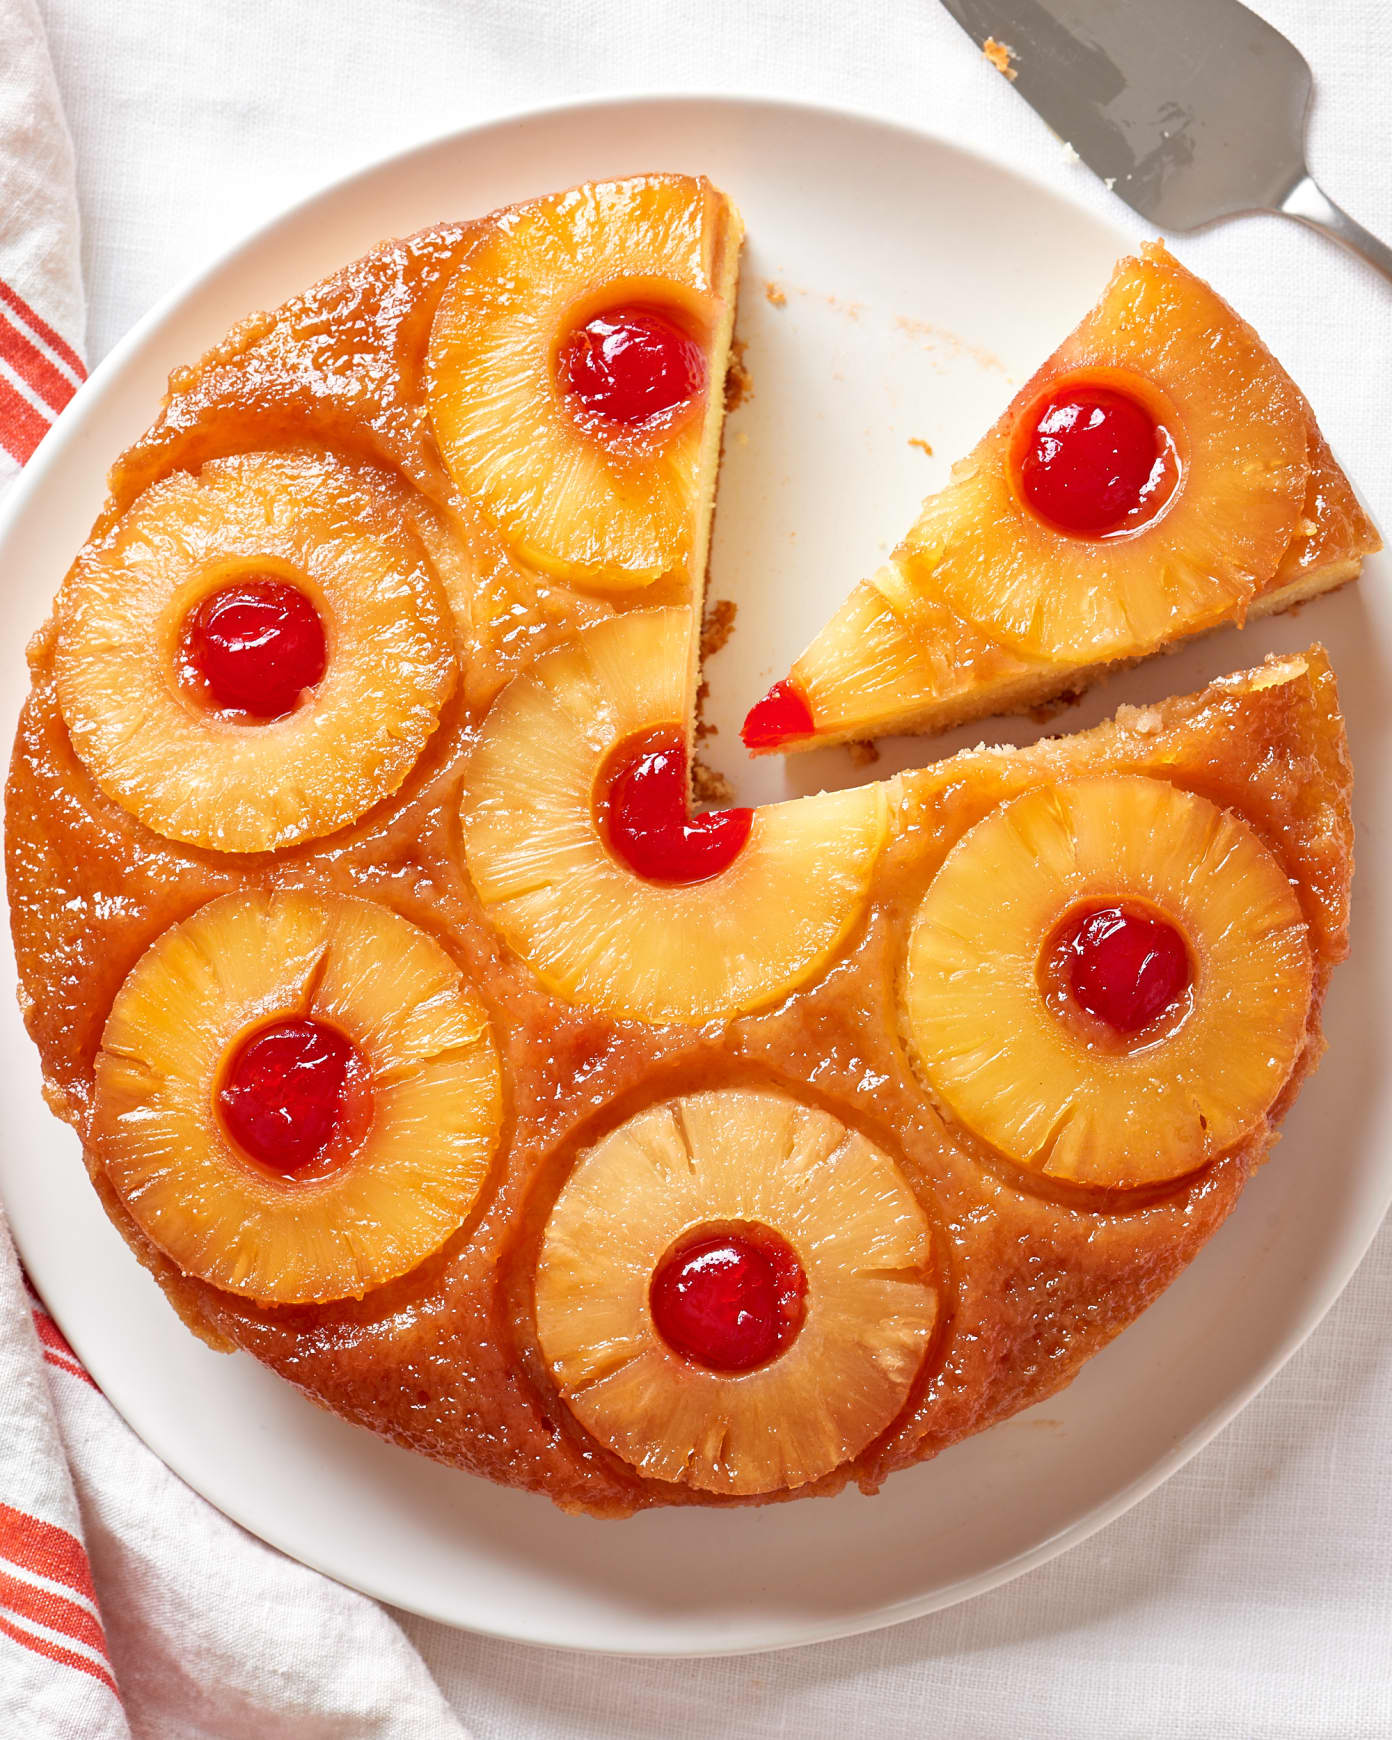 Pineapple Upside Down Cake from Scratch Recipes